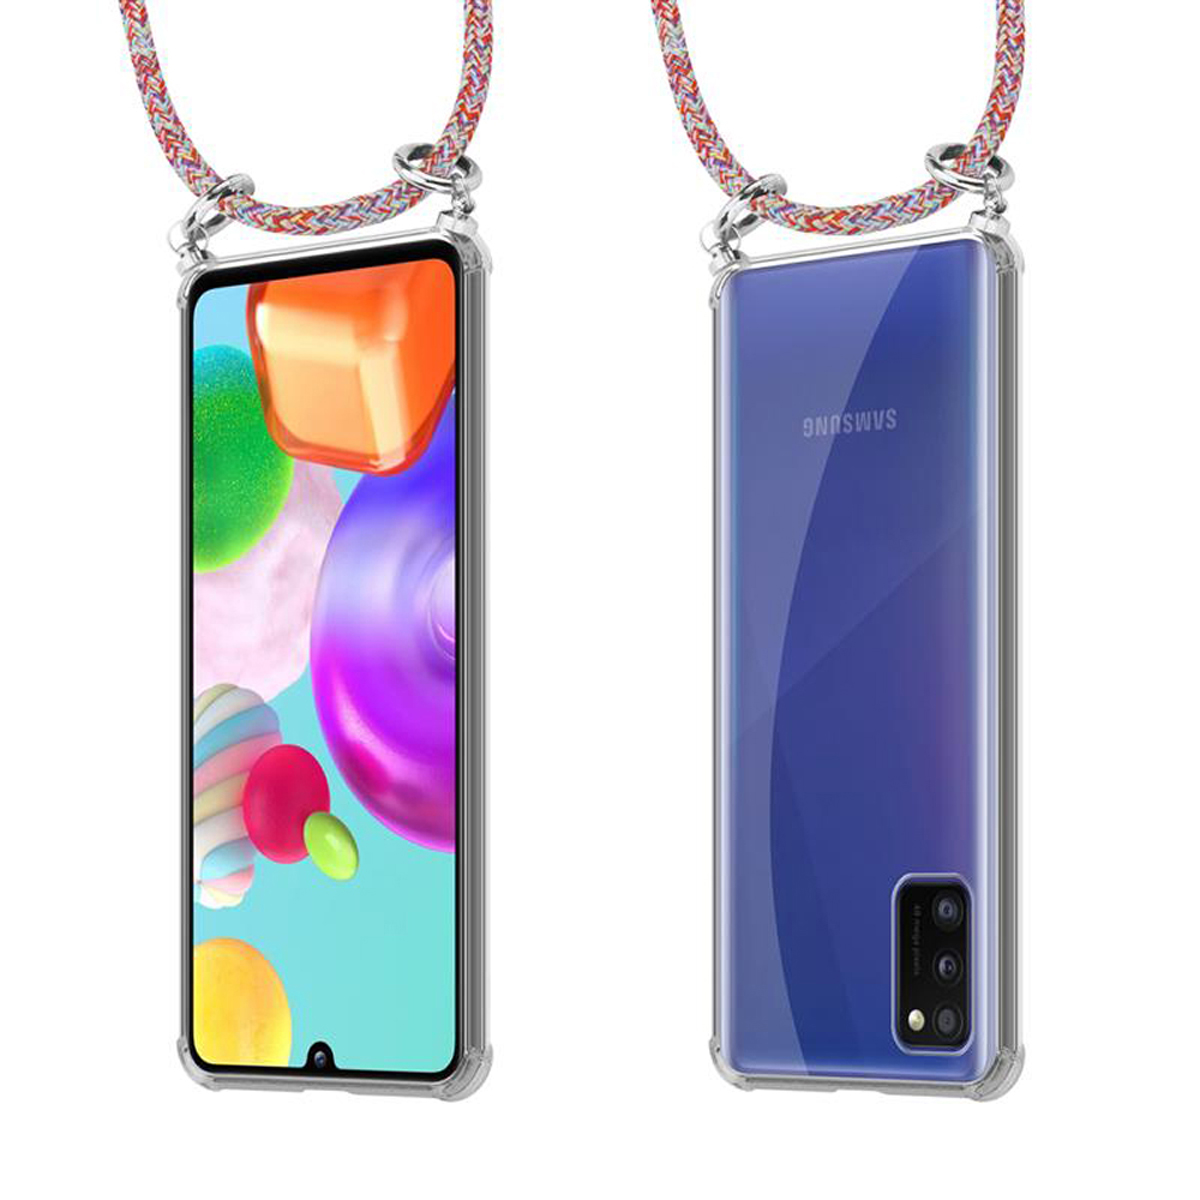 Silber Kordel abnehmbarer und COLORFUL Samsung, Backcover, CADORABO Band Ringen, mit A41, Kette Galaxy Hülle, PARROT Handy